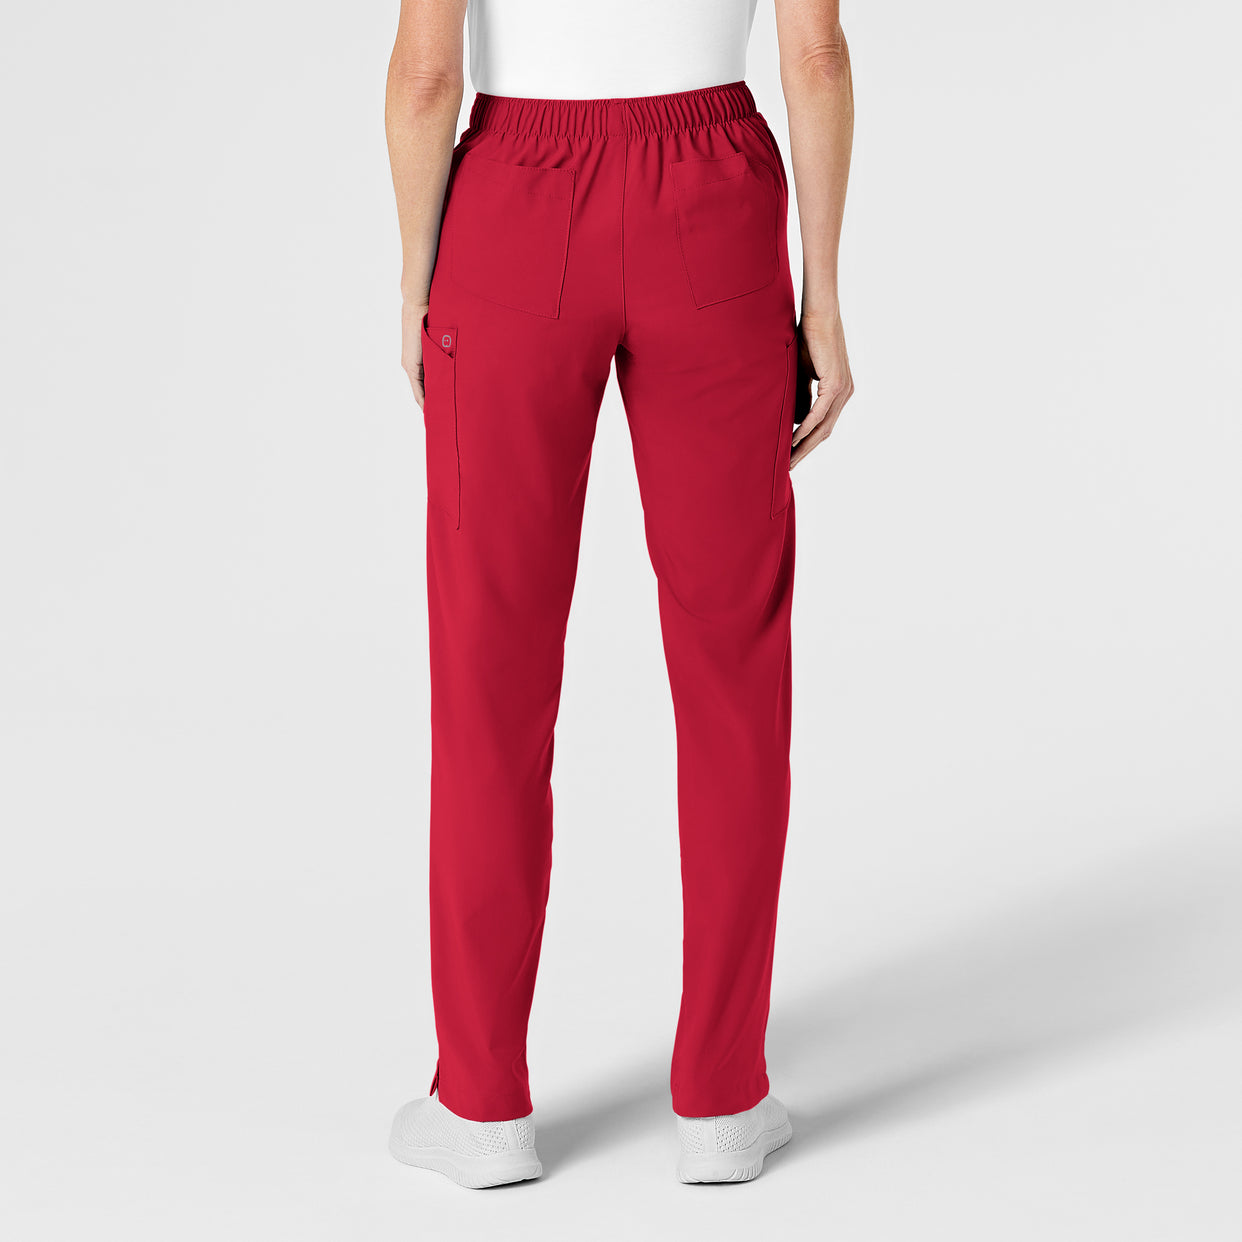 W123 Women's Flat Front Cargo Scrub Pant Red back view